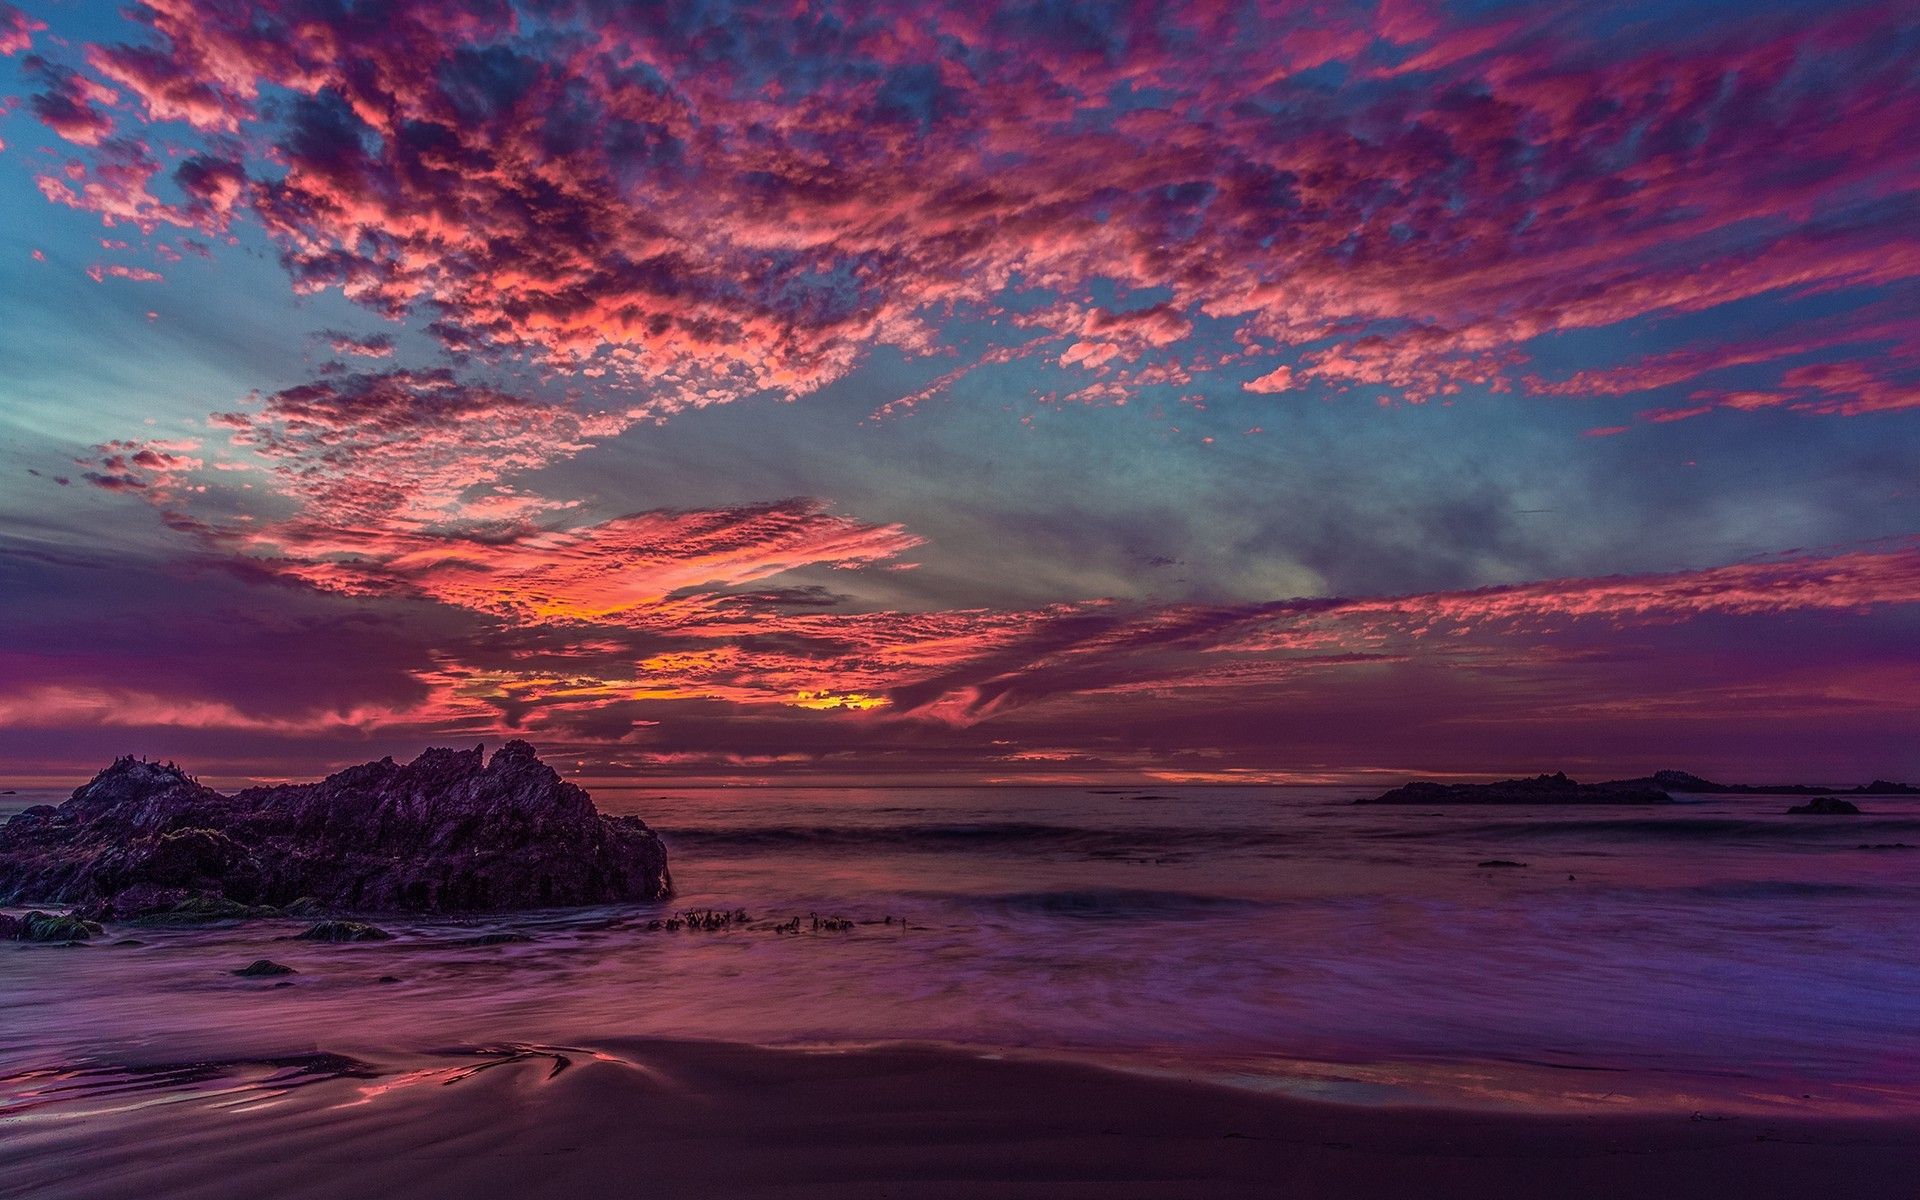 A sunset over the ocean with clouds - Sunset, California